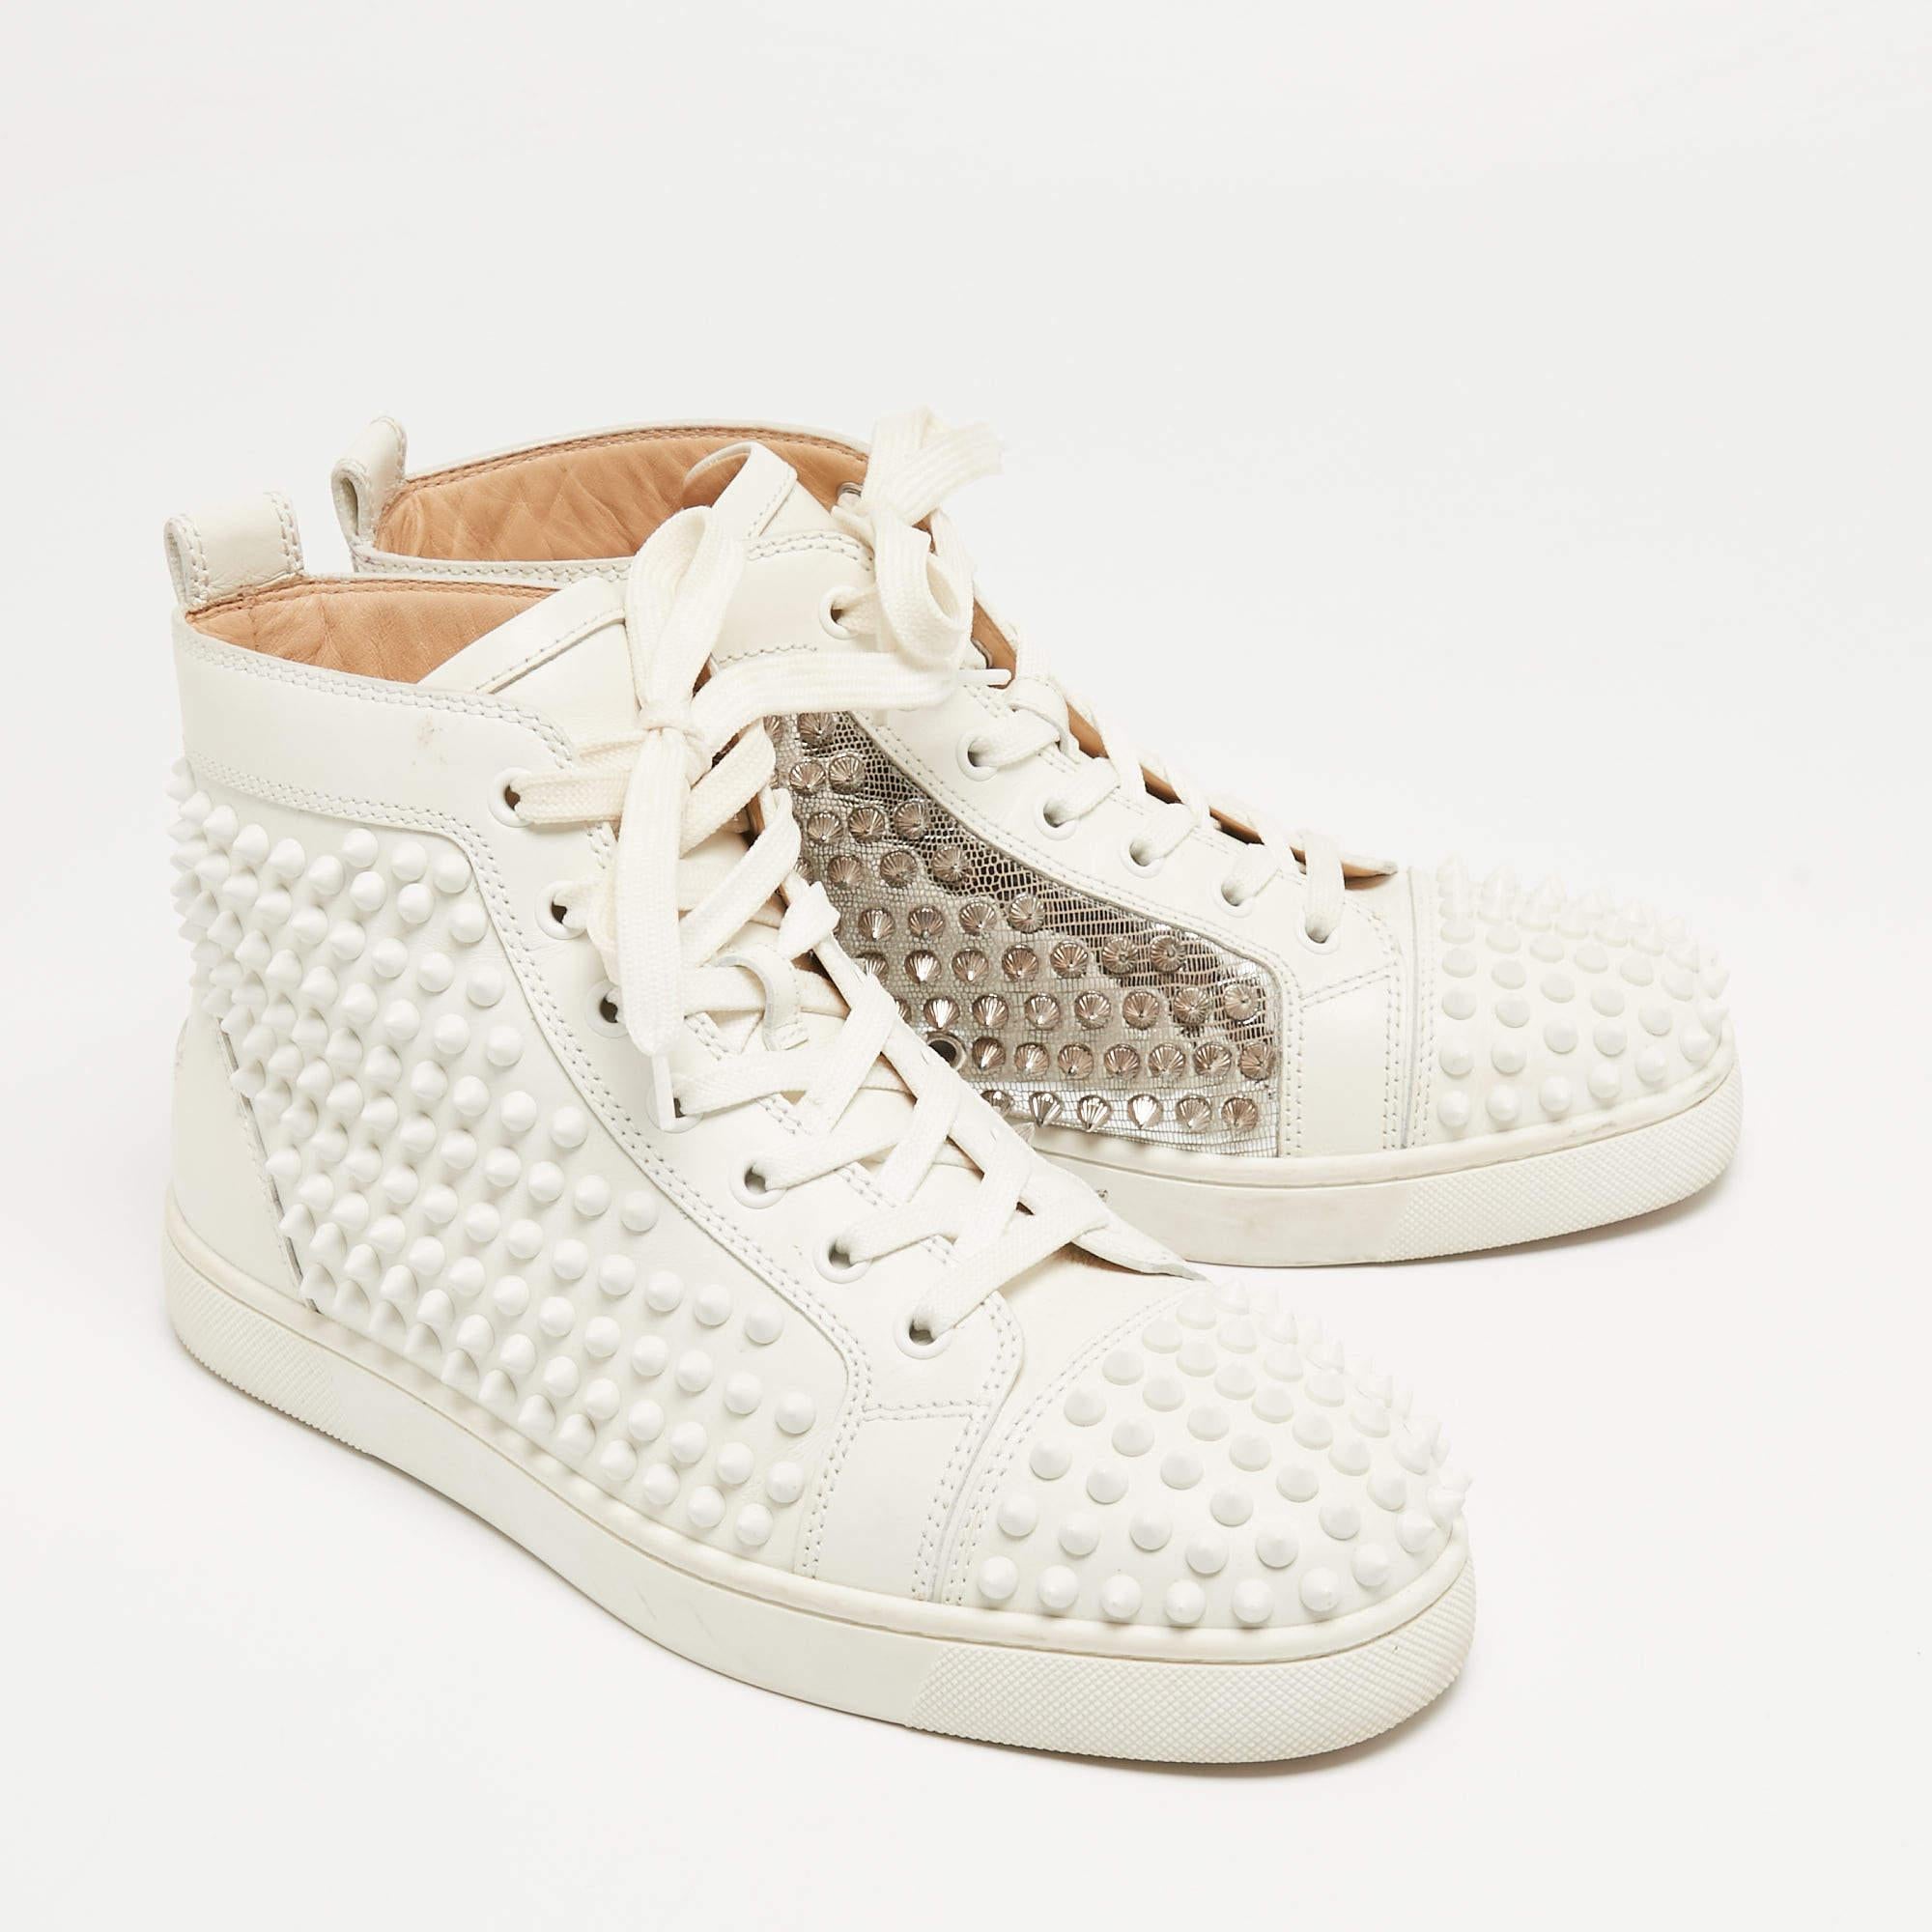 Christian Louboutin White Leather Louis Spikes High Top Sneakers Size 39 For Sale 1